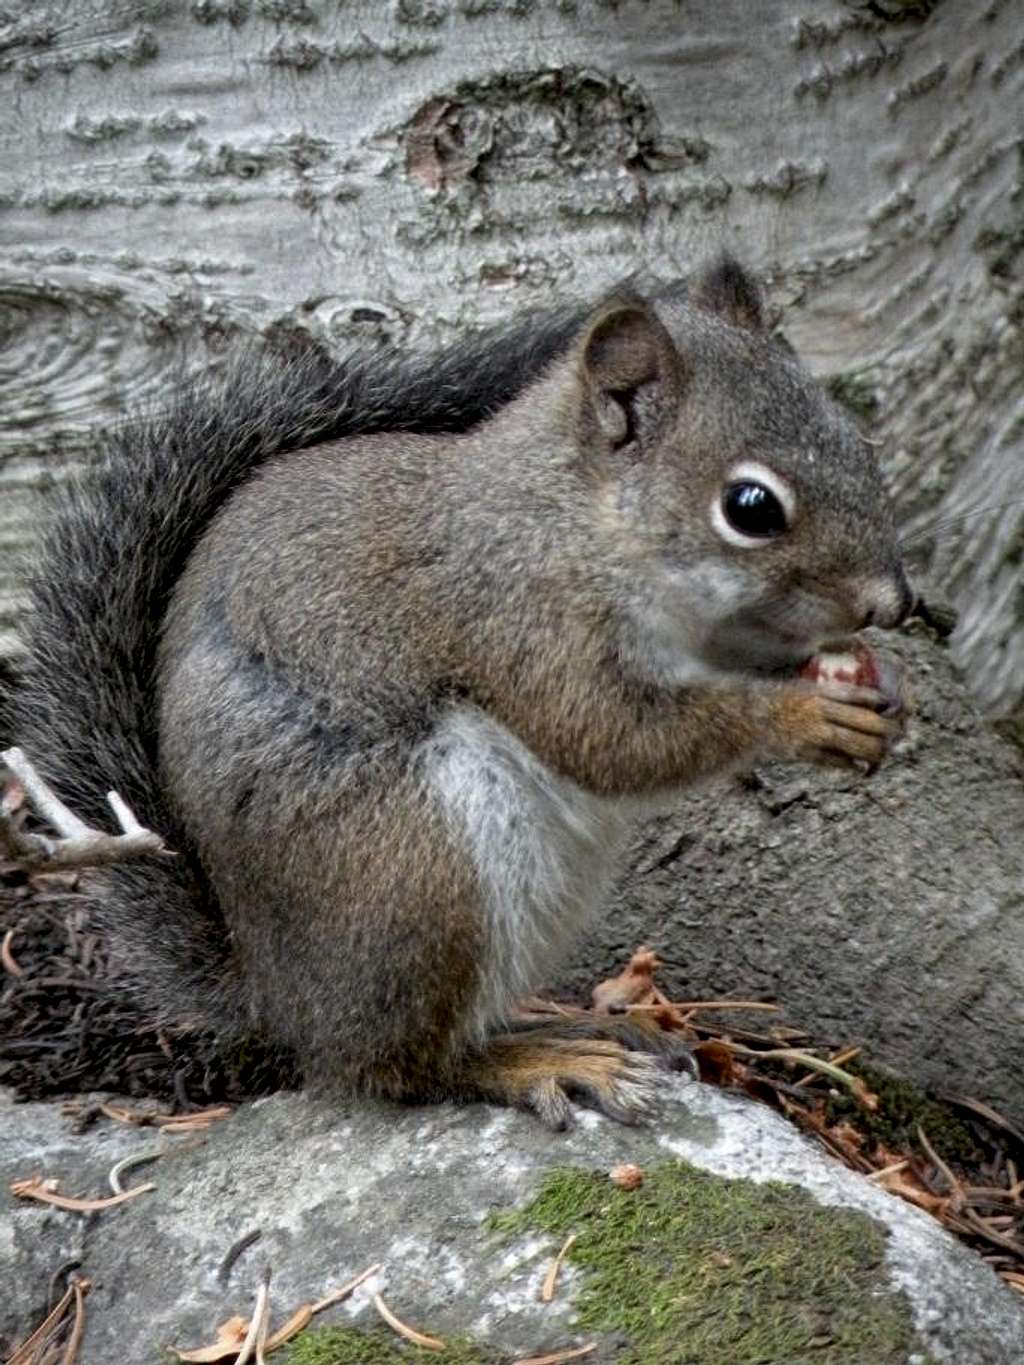 Another Squirrel